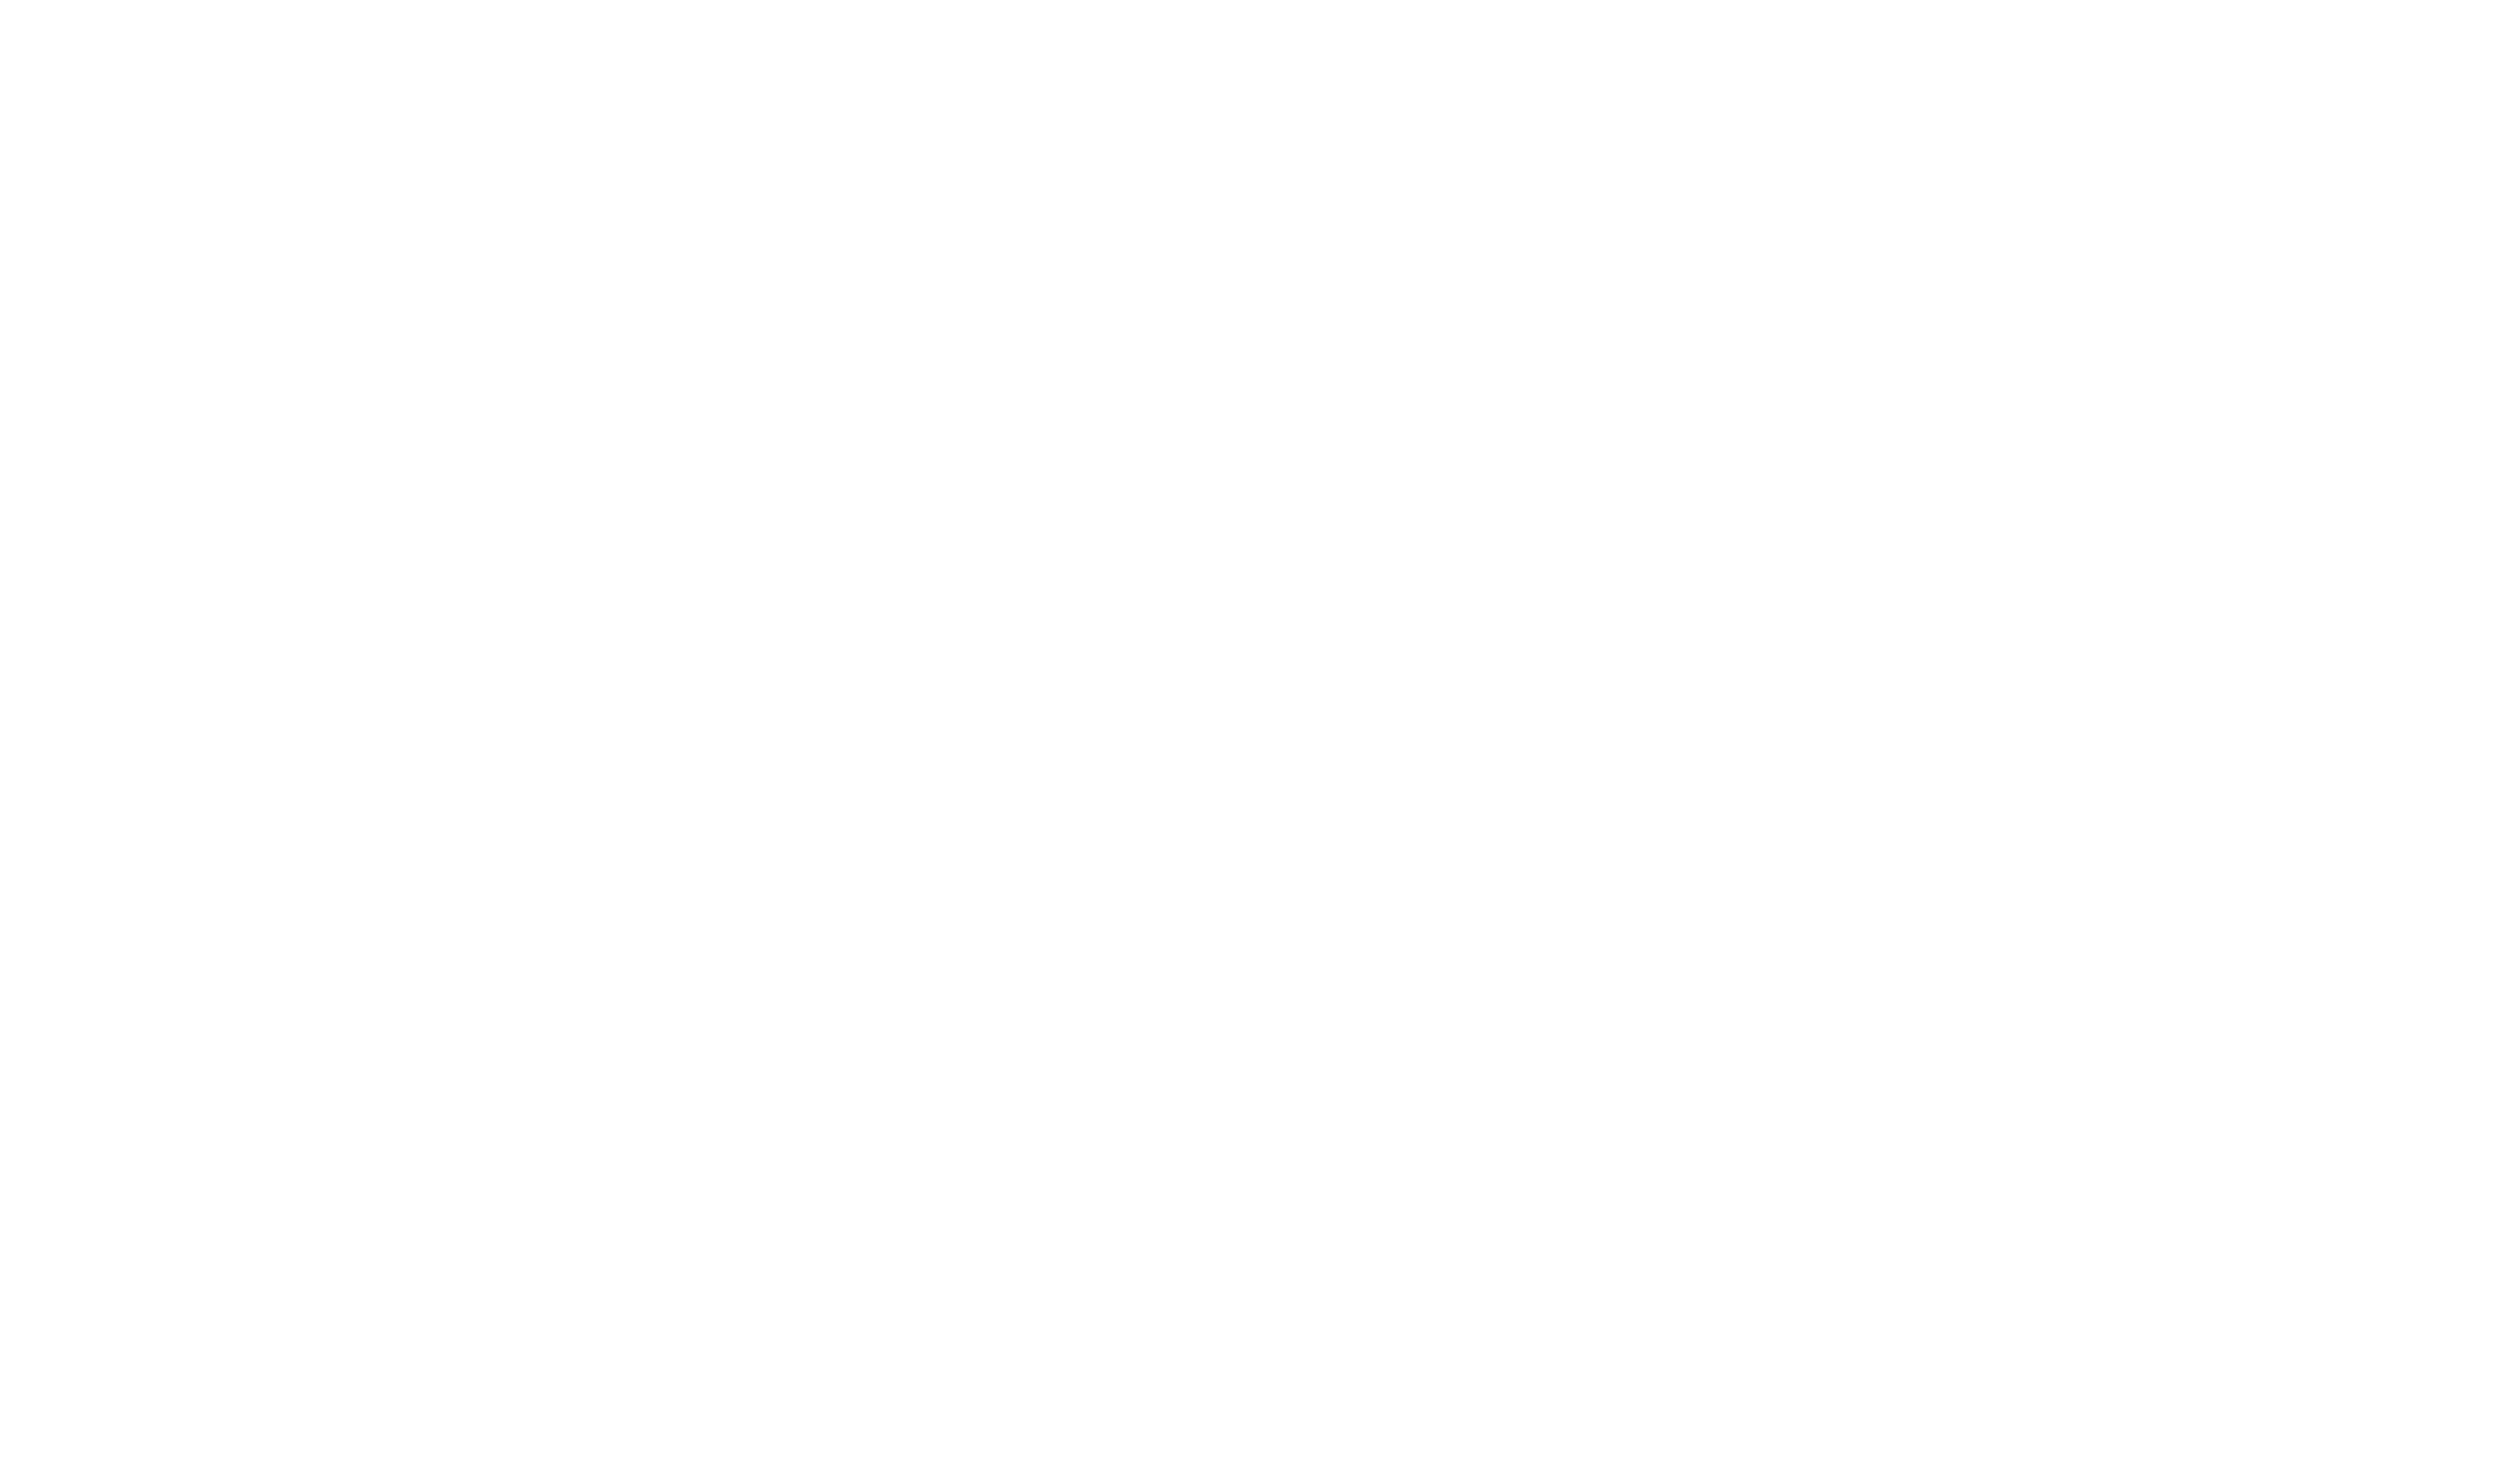 A black and white logo of the company greenleaf endeavors.